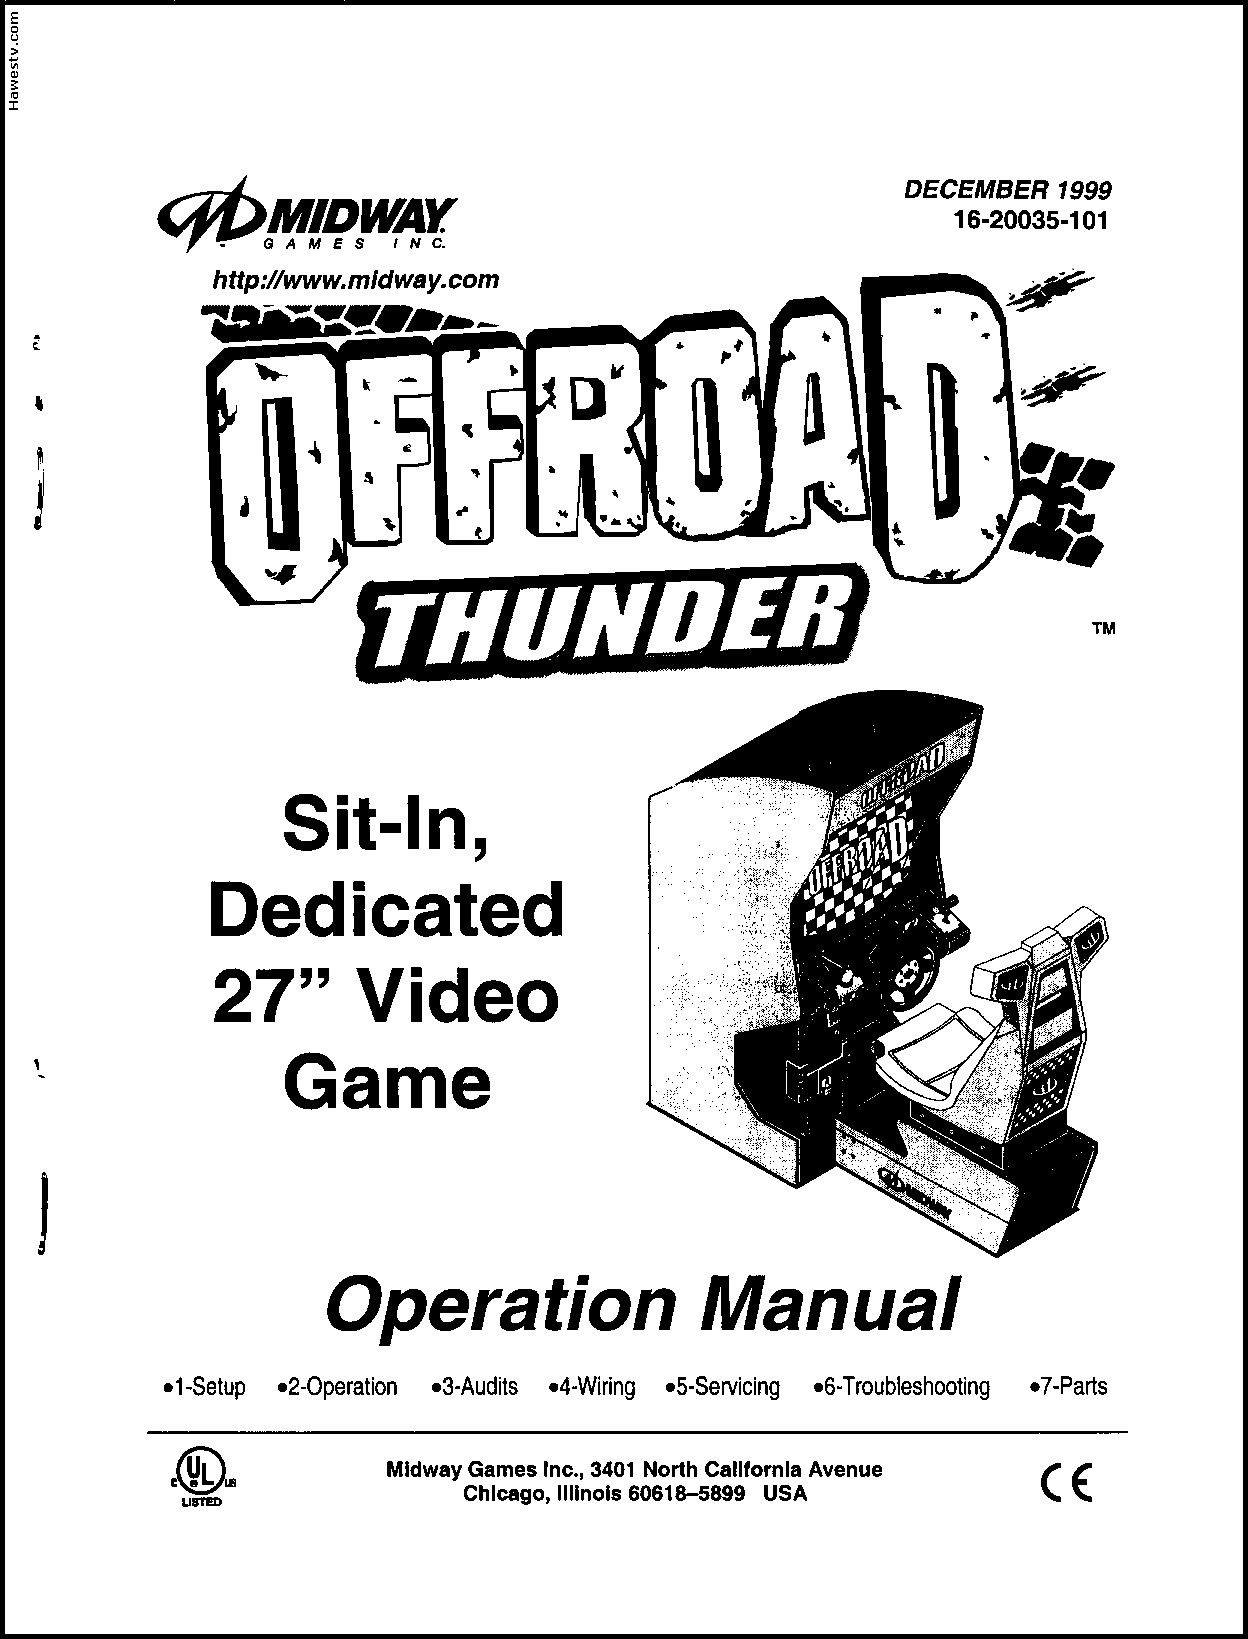 Cover of my 1999 manual for Offroad Thunder, a Midway Home-San Diego game